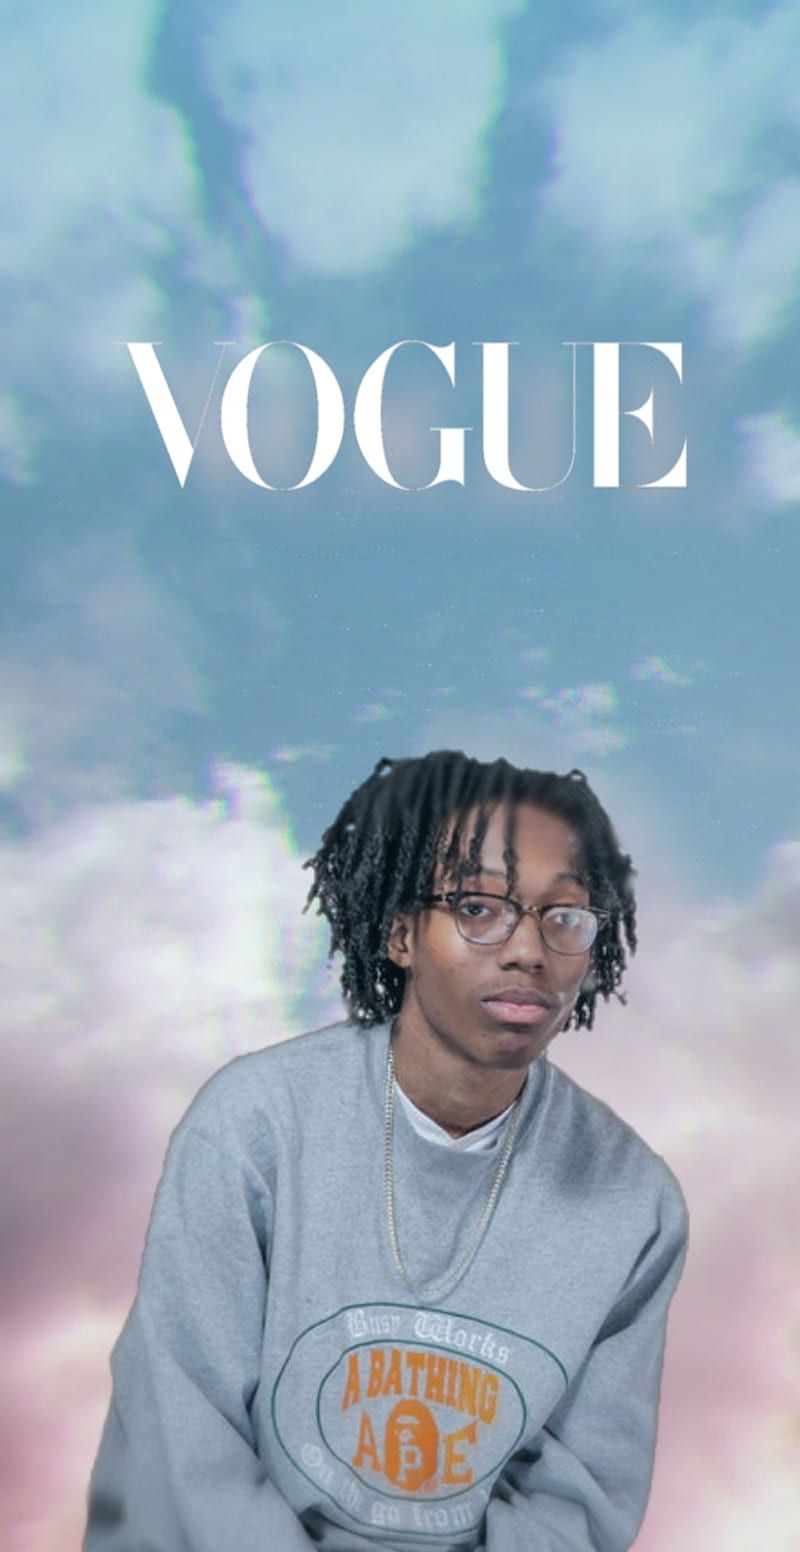 A man with glasses and braids is on the cover of vogue - Vogue